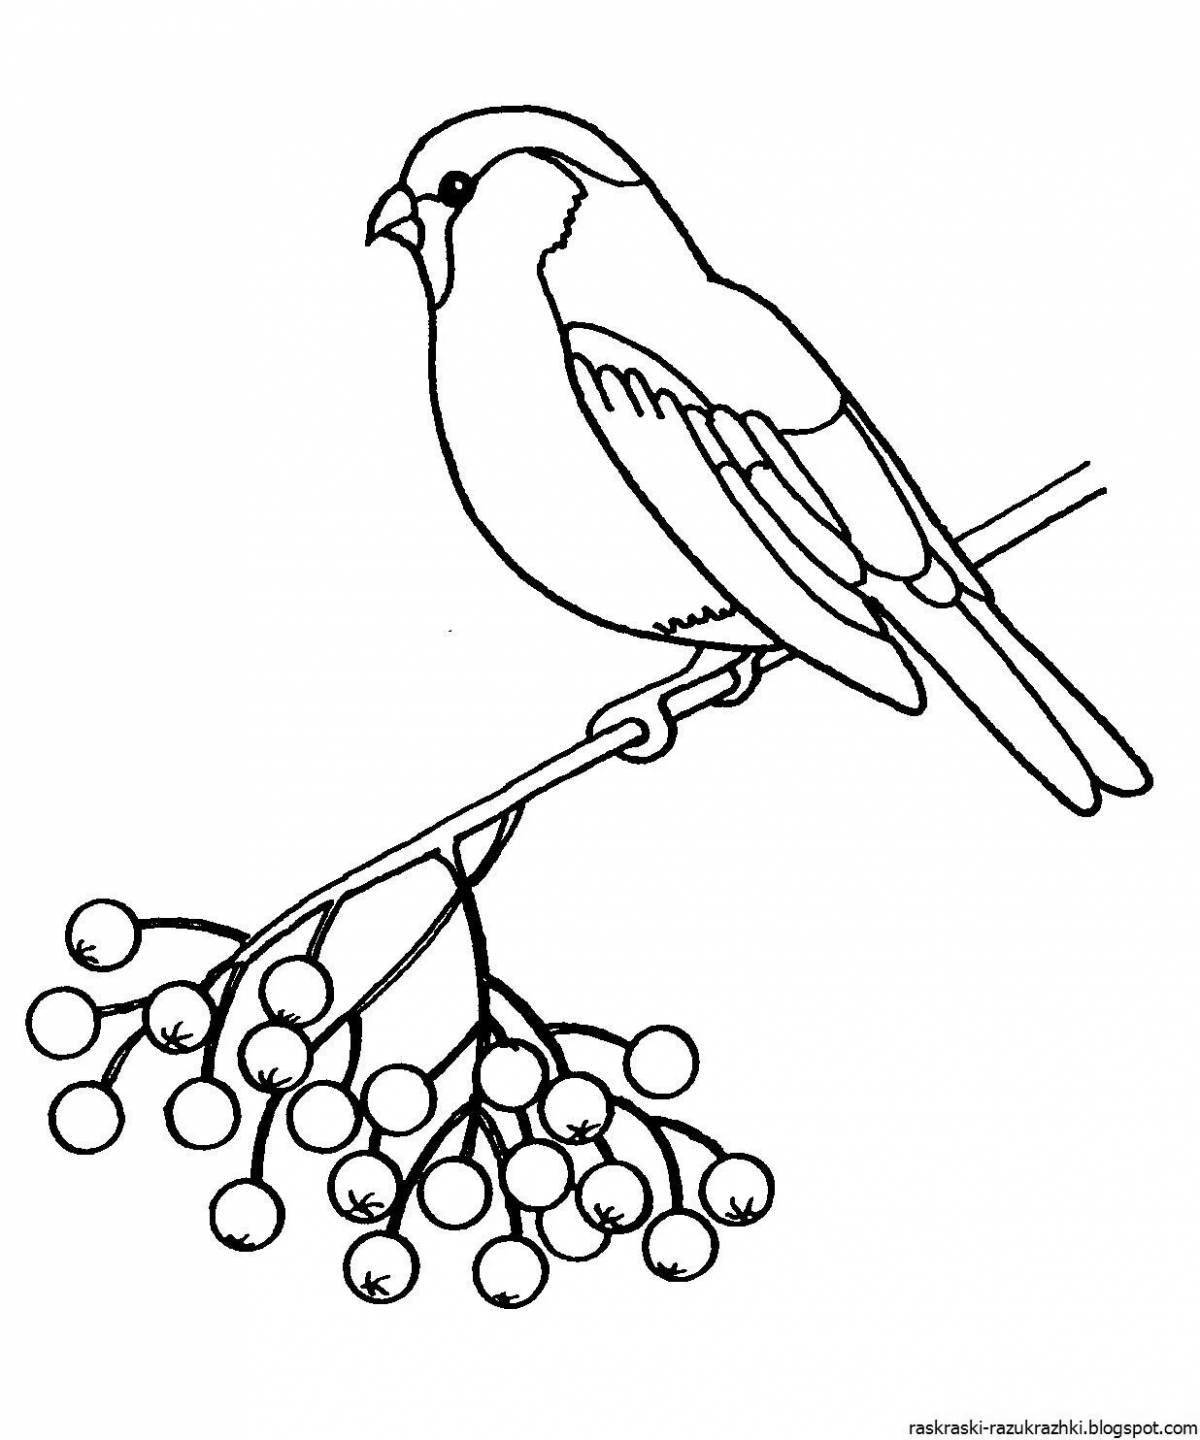 Gorgeous bullfinch coloring for kids